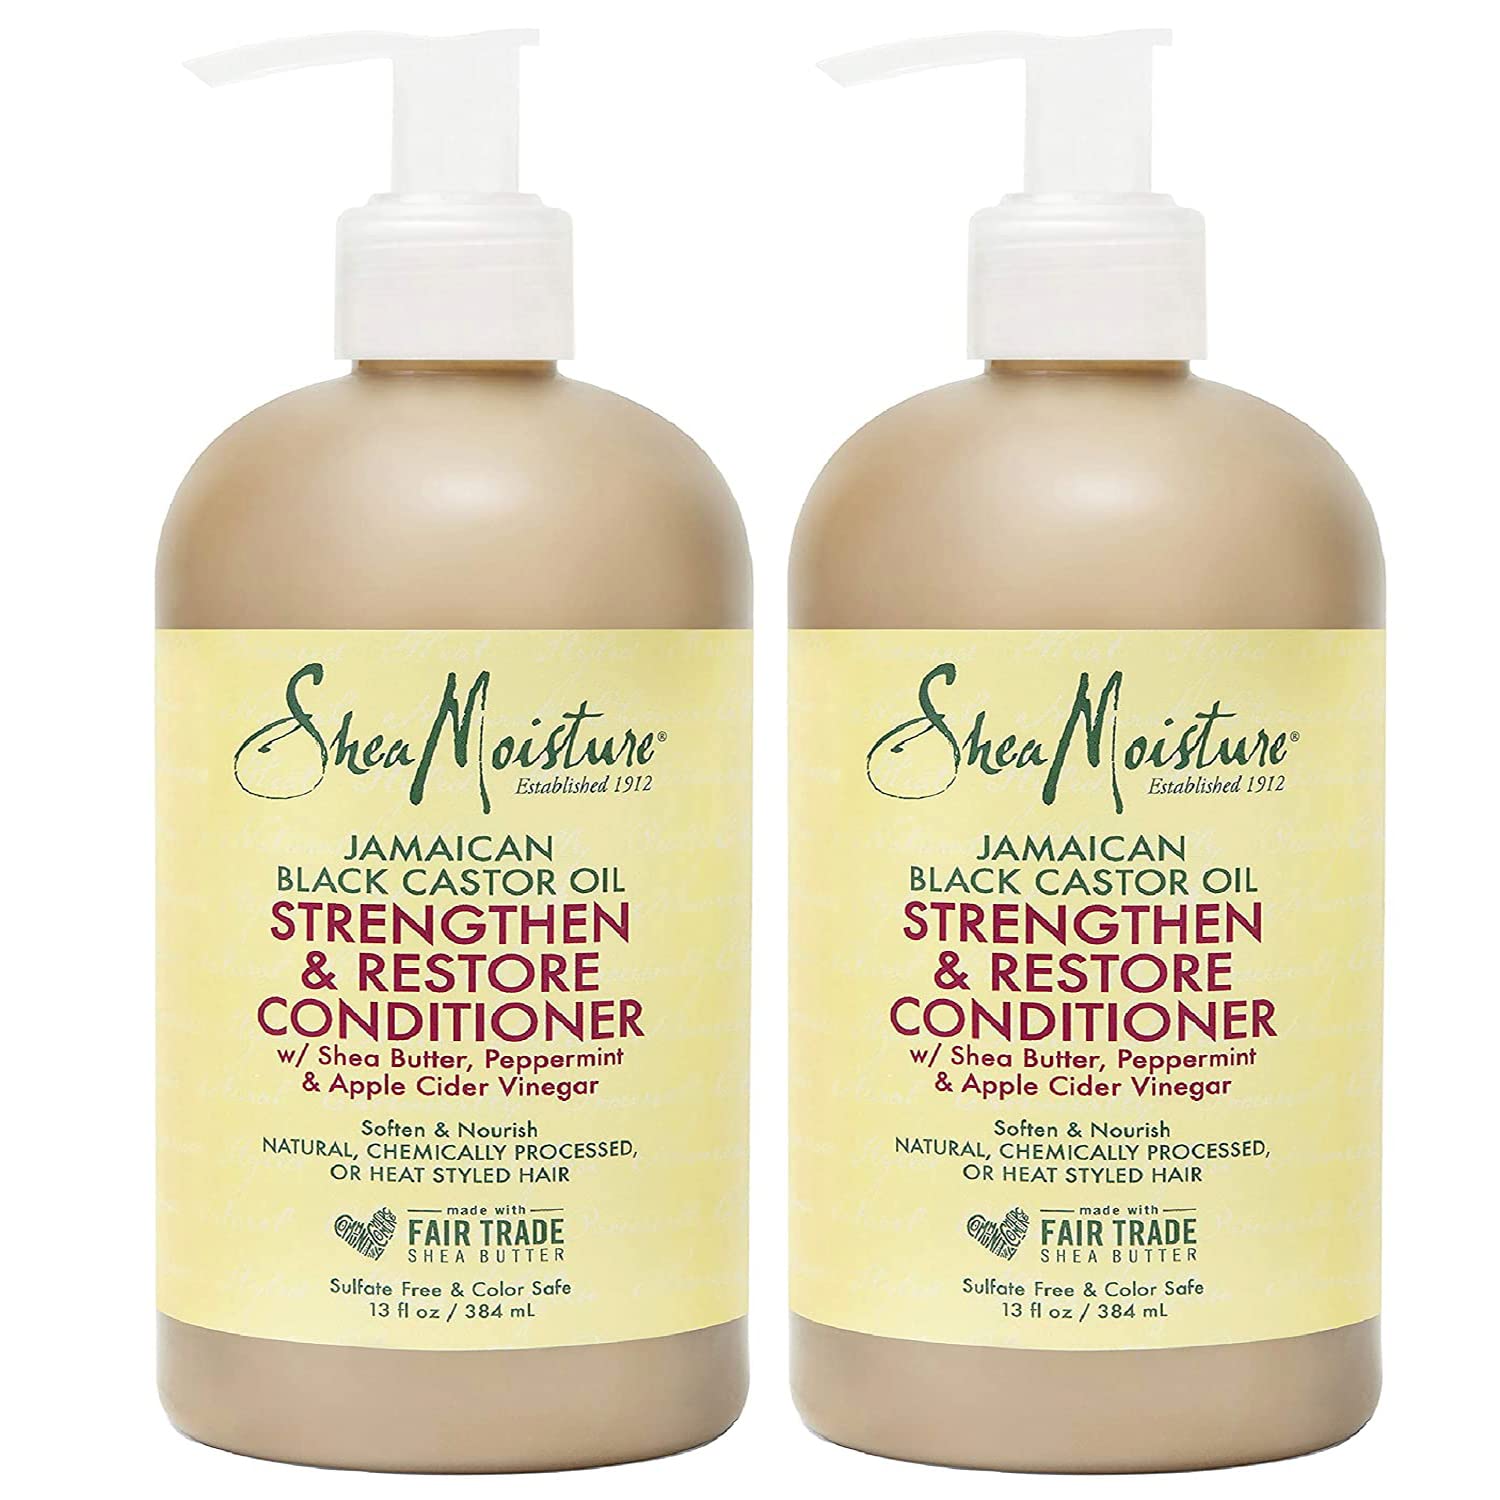 Shea Moisture Jamaican Black Castor Oil 13 oz. Strengthen, Grow & Restore Conditioner with Shea Butter, Peppermint and Keratin - Sulfate Free and Color Safe - Value Pack of 2 Each